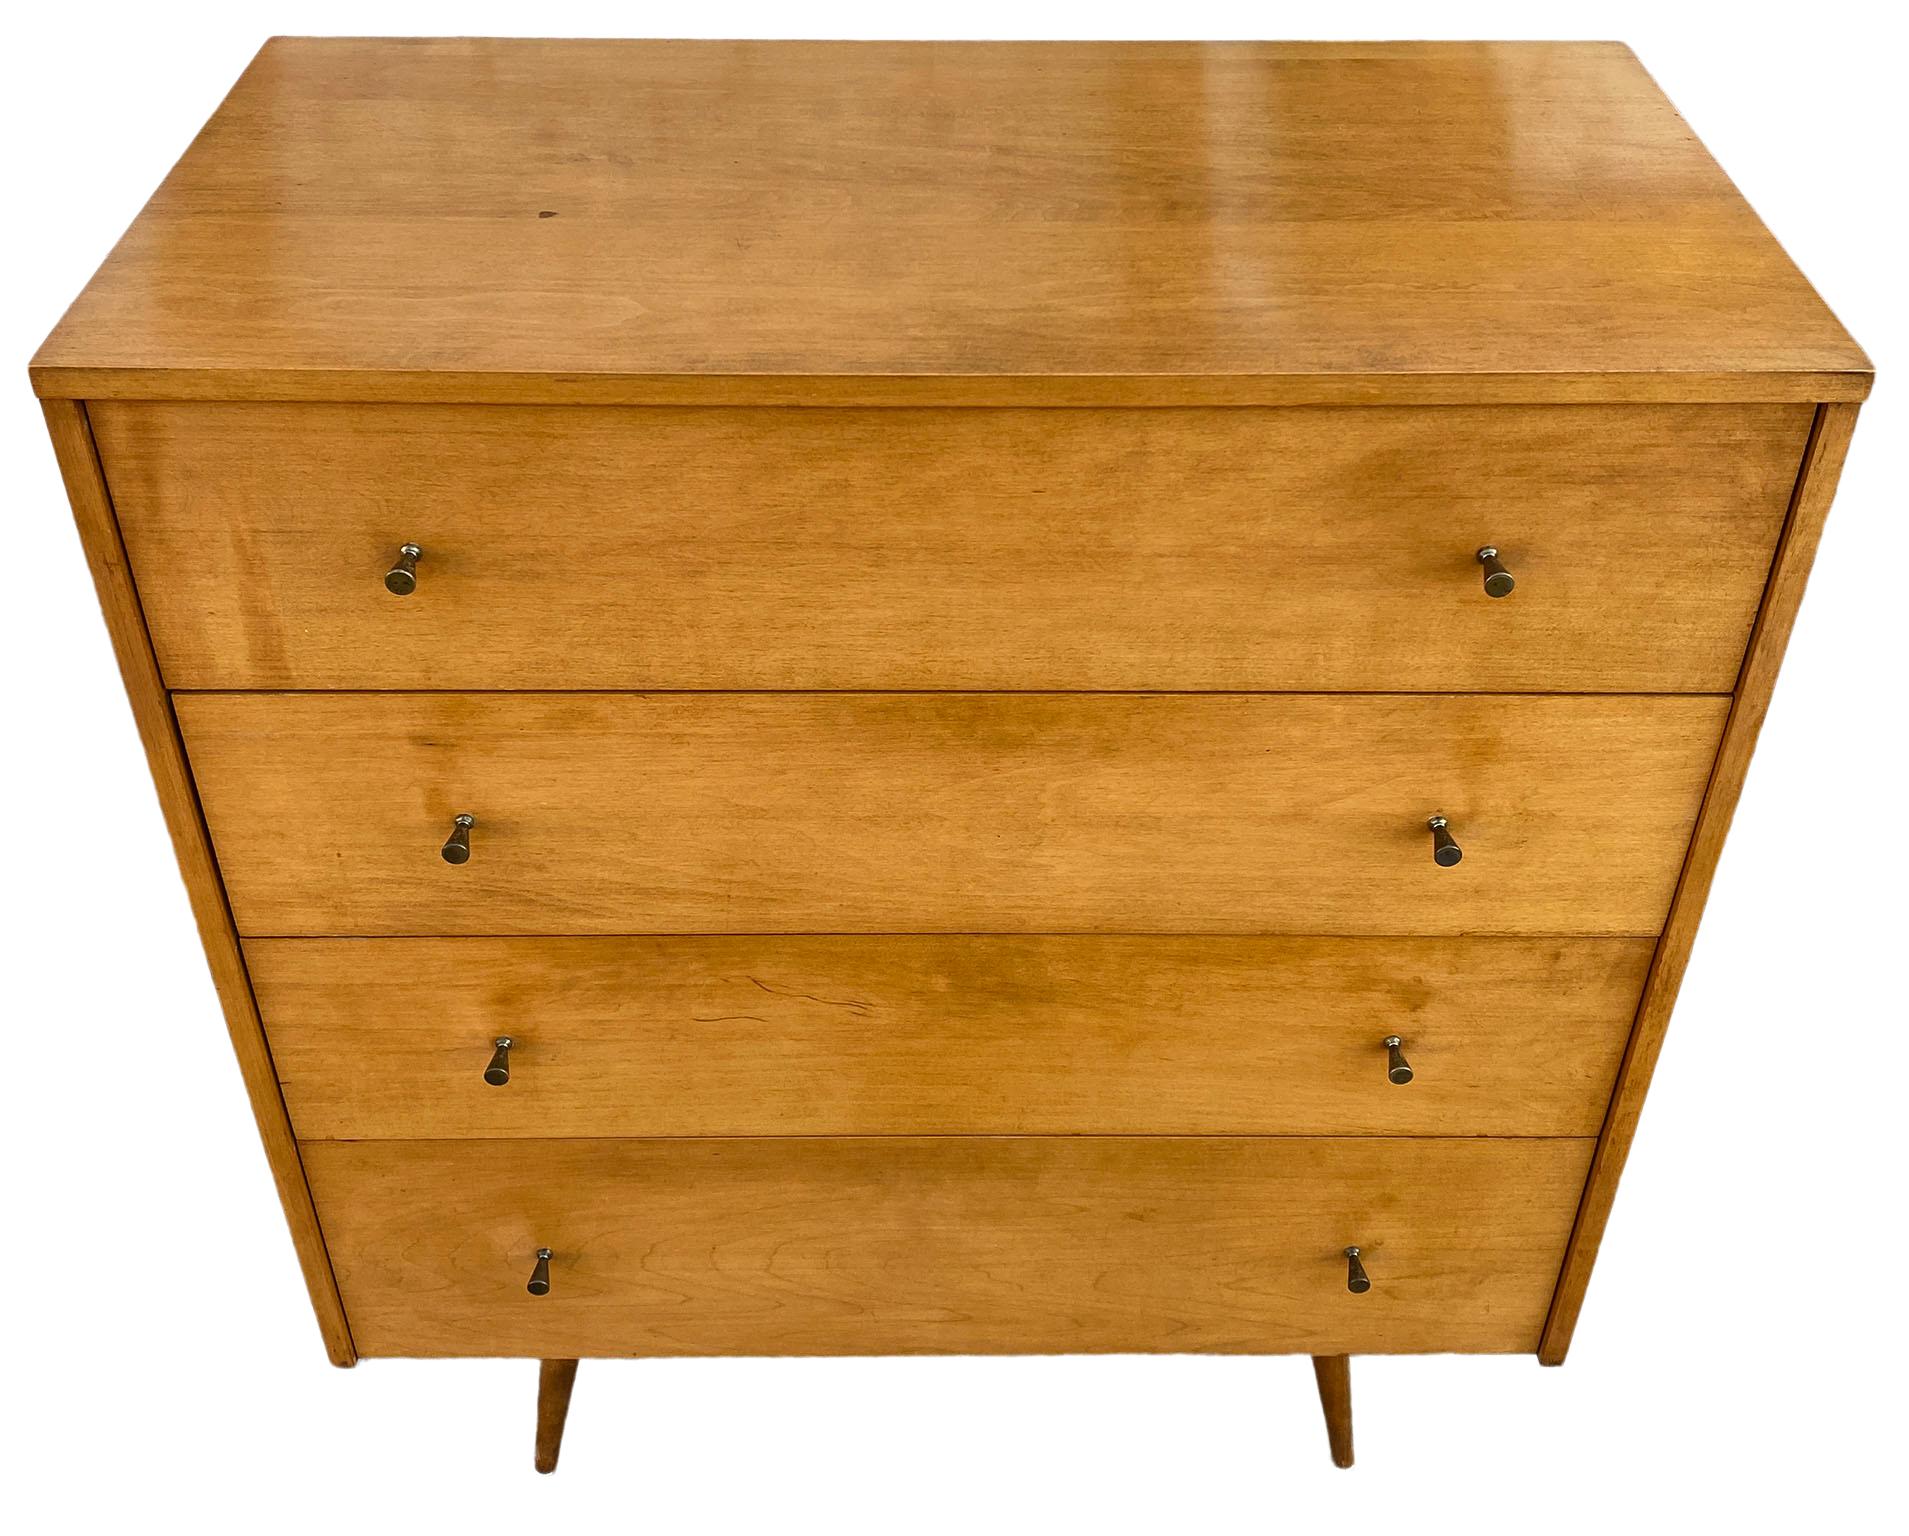 Beautiful midcentury tall dresser 4-drawer dresser by Paul McCobb circa 1950 Planner Group #1501 with 4 center drawers. Solid maple construction has a beautiful Medium Blonde original stain. All original brass cone pulls polished. Sits on 4 solid